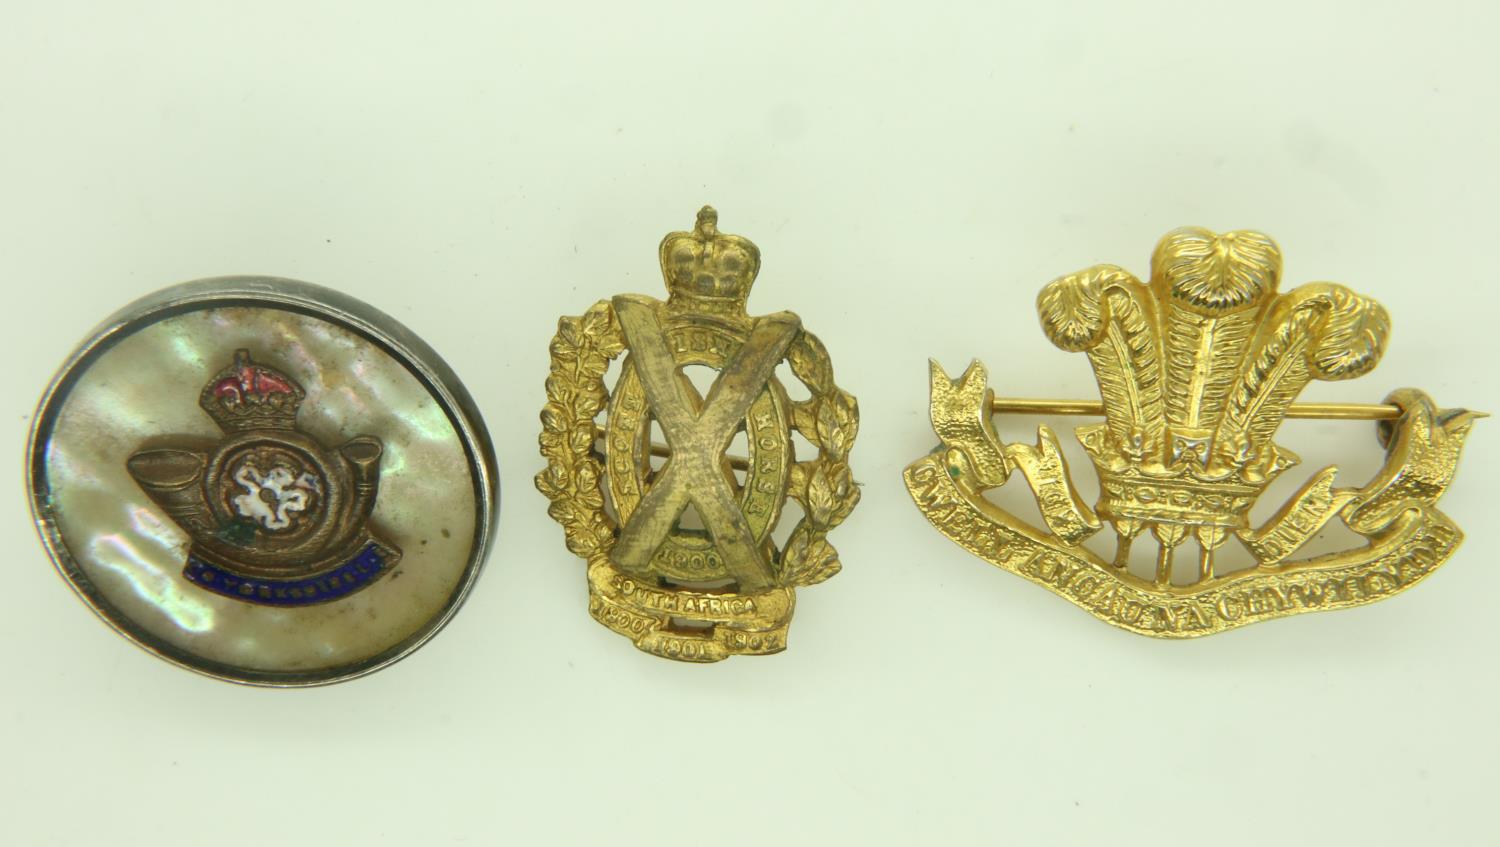 Three British WWII sweetheart badges. UK P&P Group 0 (£6+VAT for the first lot and £1+VAT for